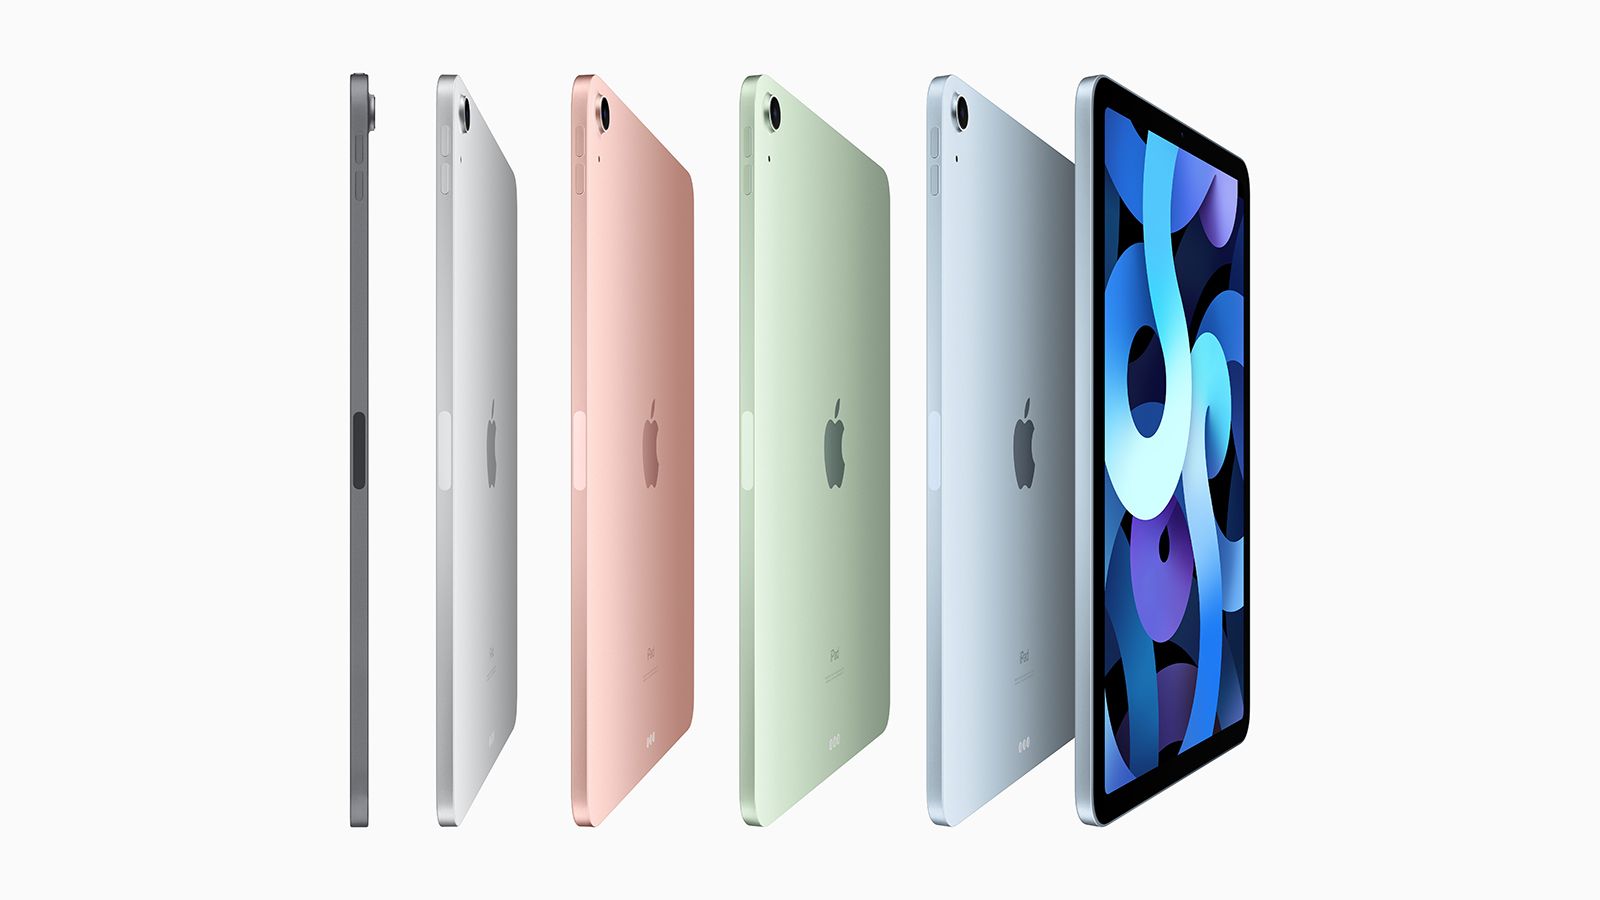 New iPad Air 4 release date has been confirmed, and it's coming next